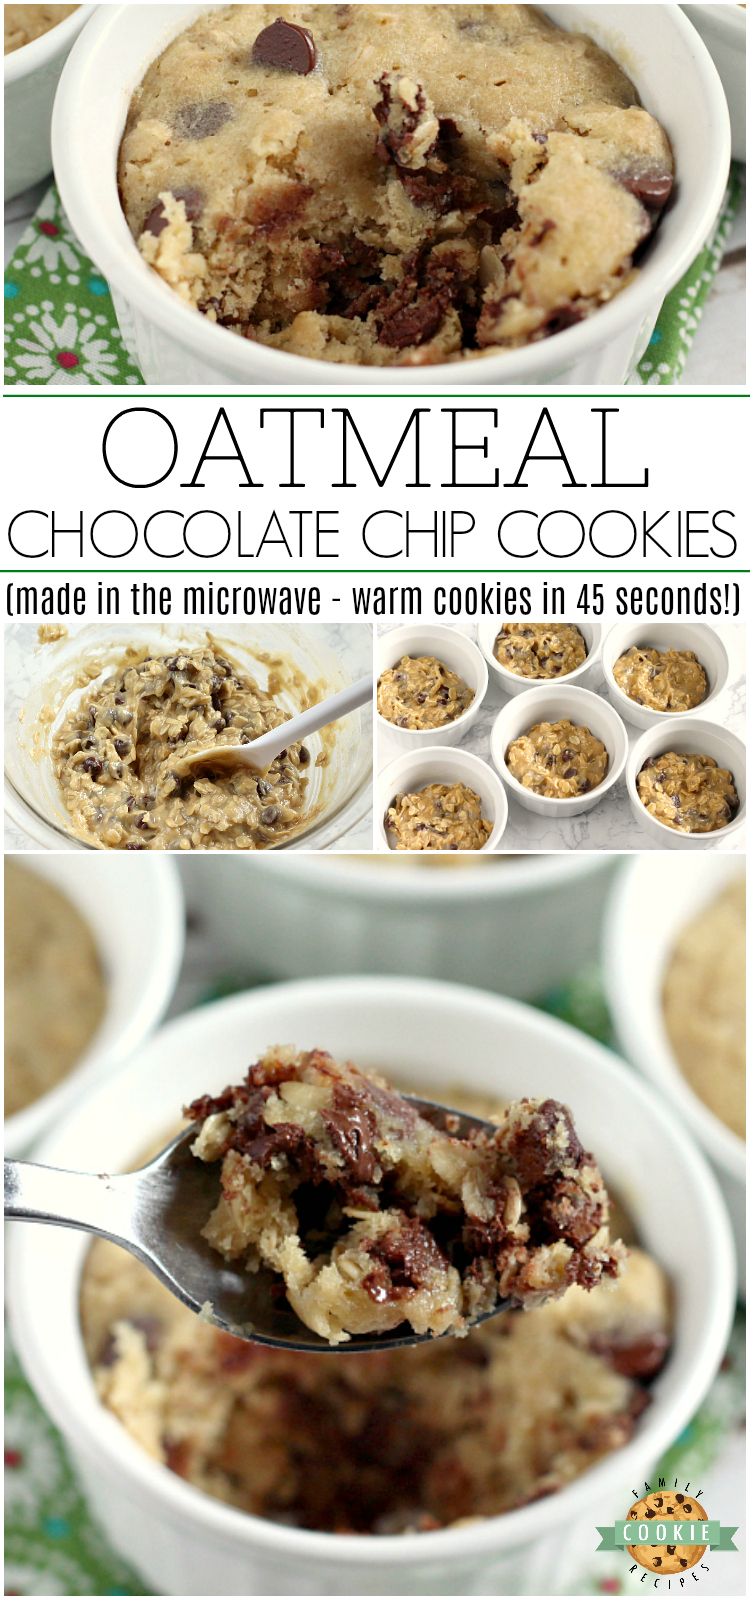 Oatmeal Chocolate Chip Cookies that are ready in less than 5 minutes! This basic oatmeal chocolate chip cookie recipe makes six soft and chewy mug cookies in the microwave - no oven required!